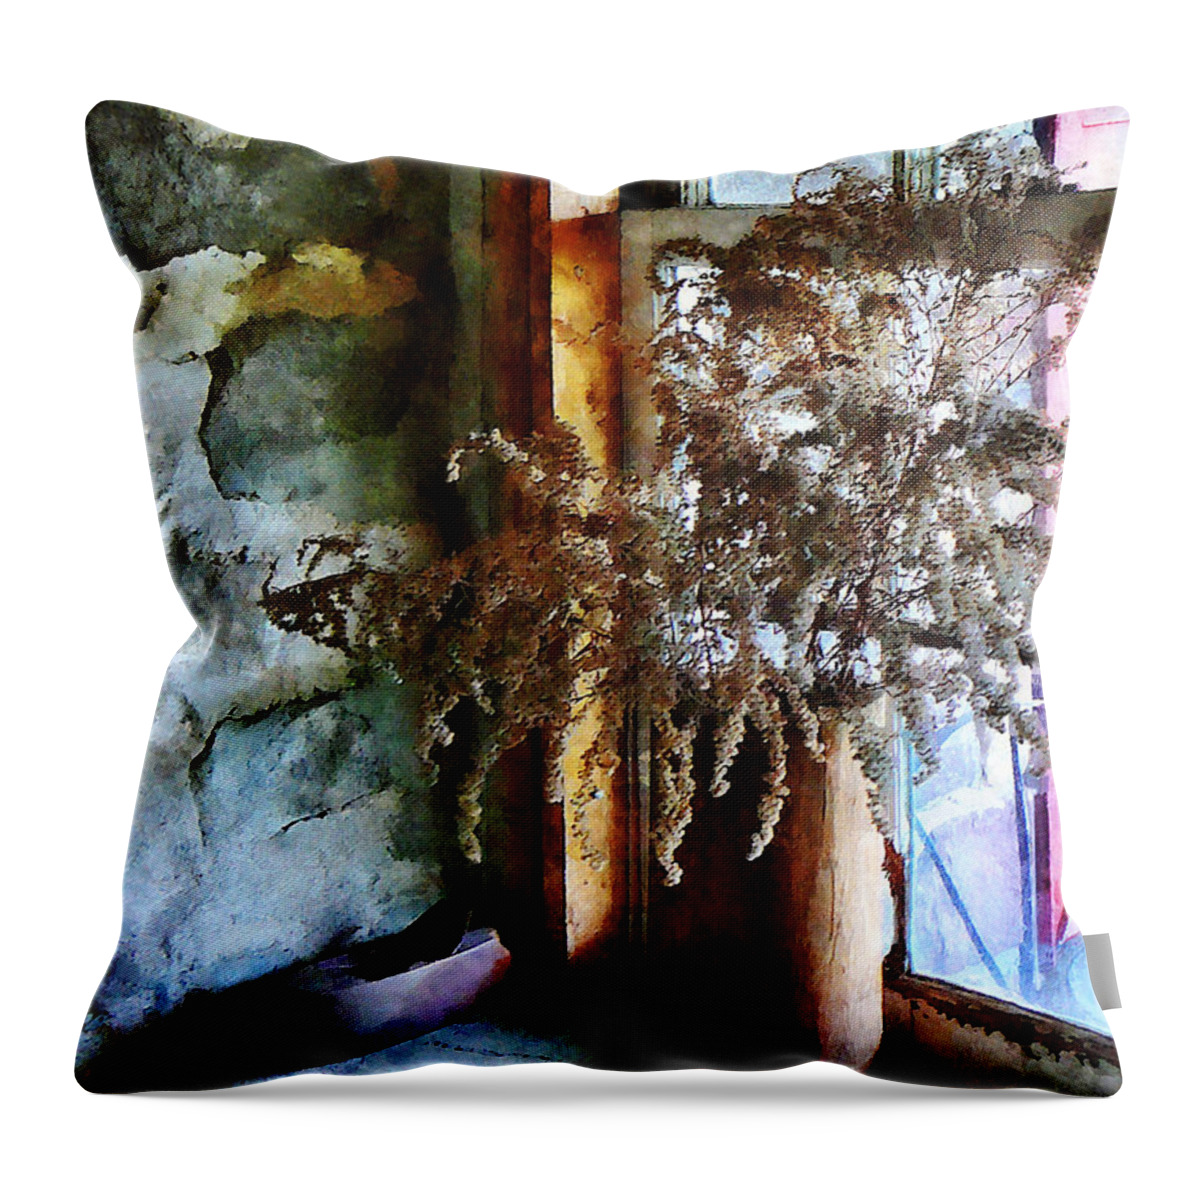 Flowers Throw Pillow featuring the photograph Dried Flowers on Windowsill by Susan Savad